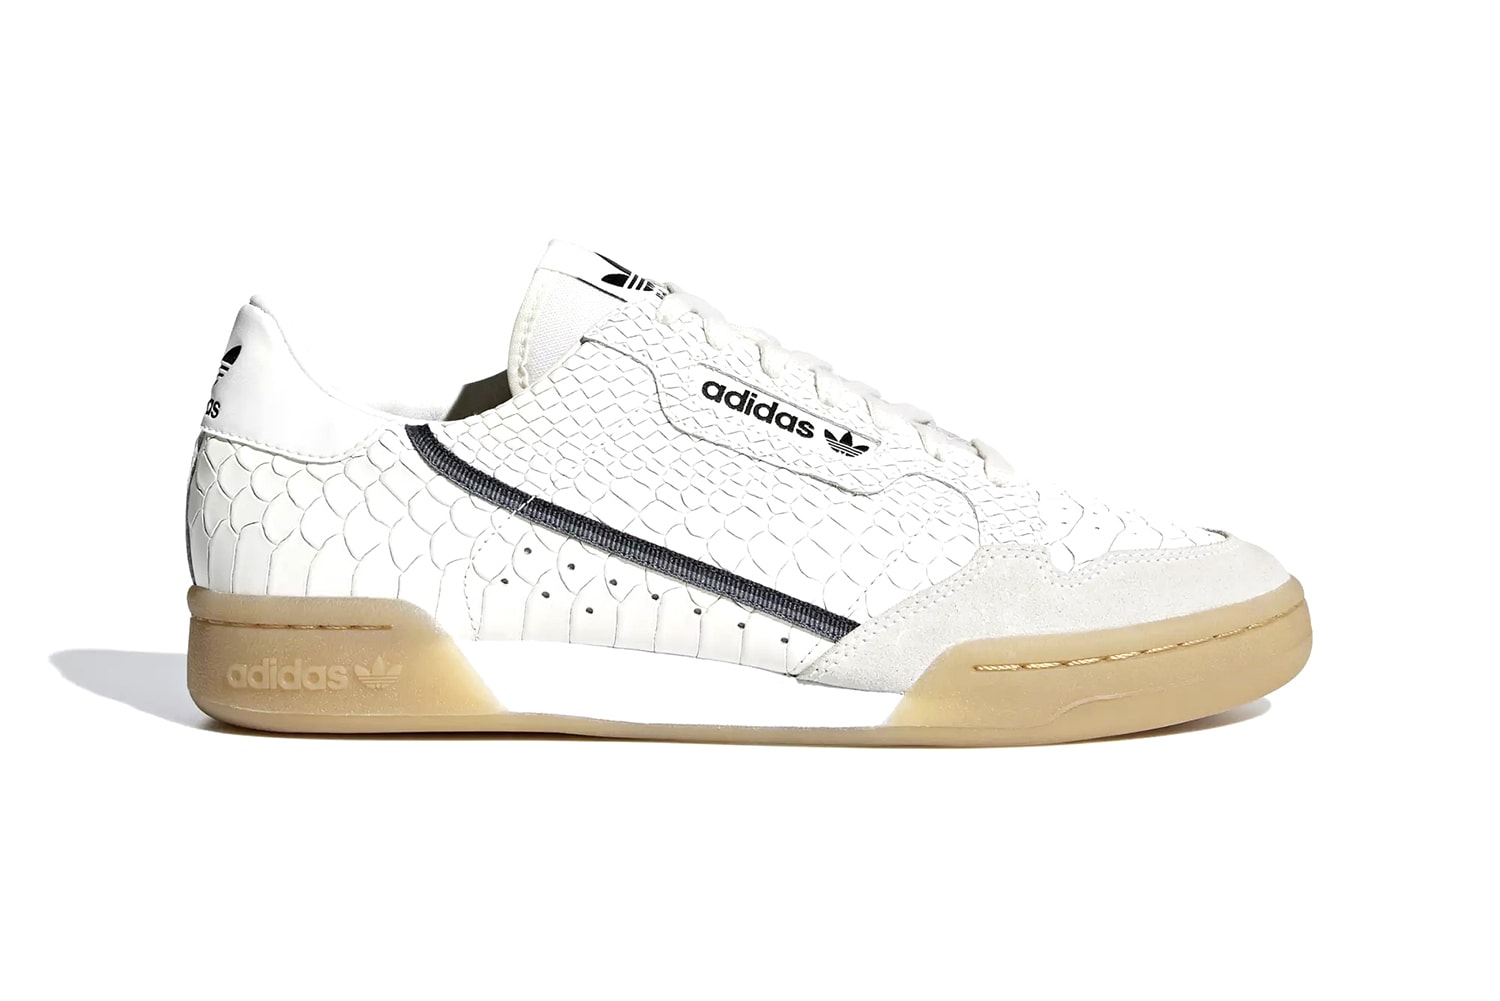 adidas Originals Continental 80 Rascal Snakeskin Black White Faux Leather Luxe Upgrade YEEZY Powerphase sneaker footwear trainer release information details